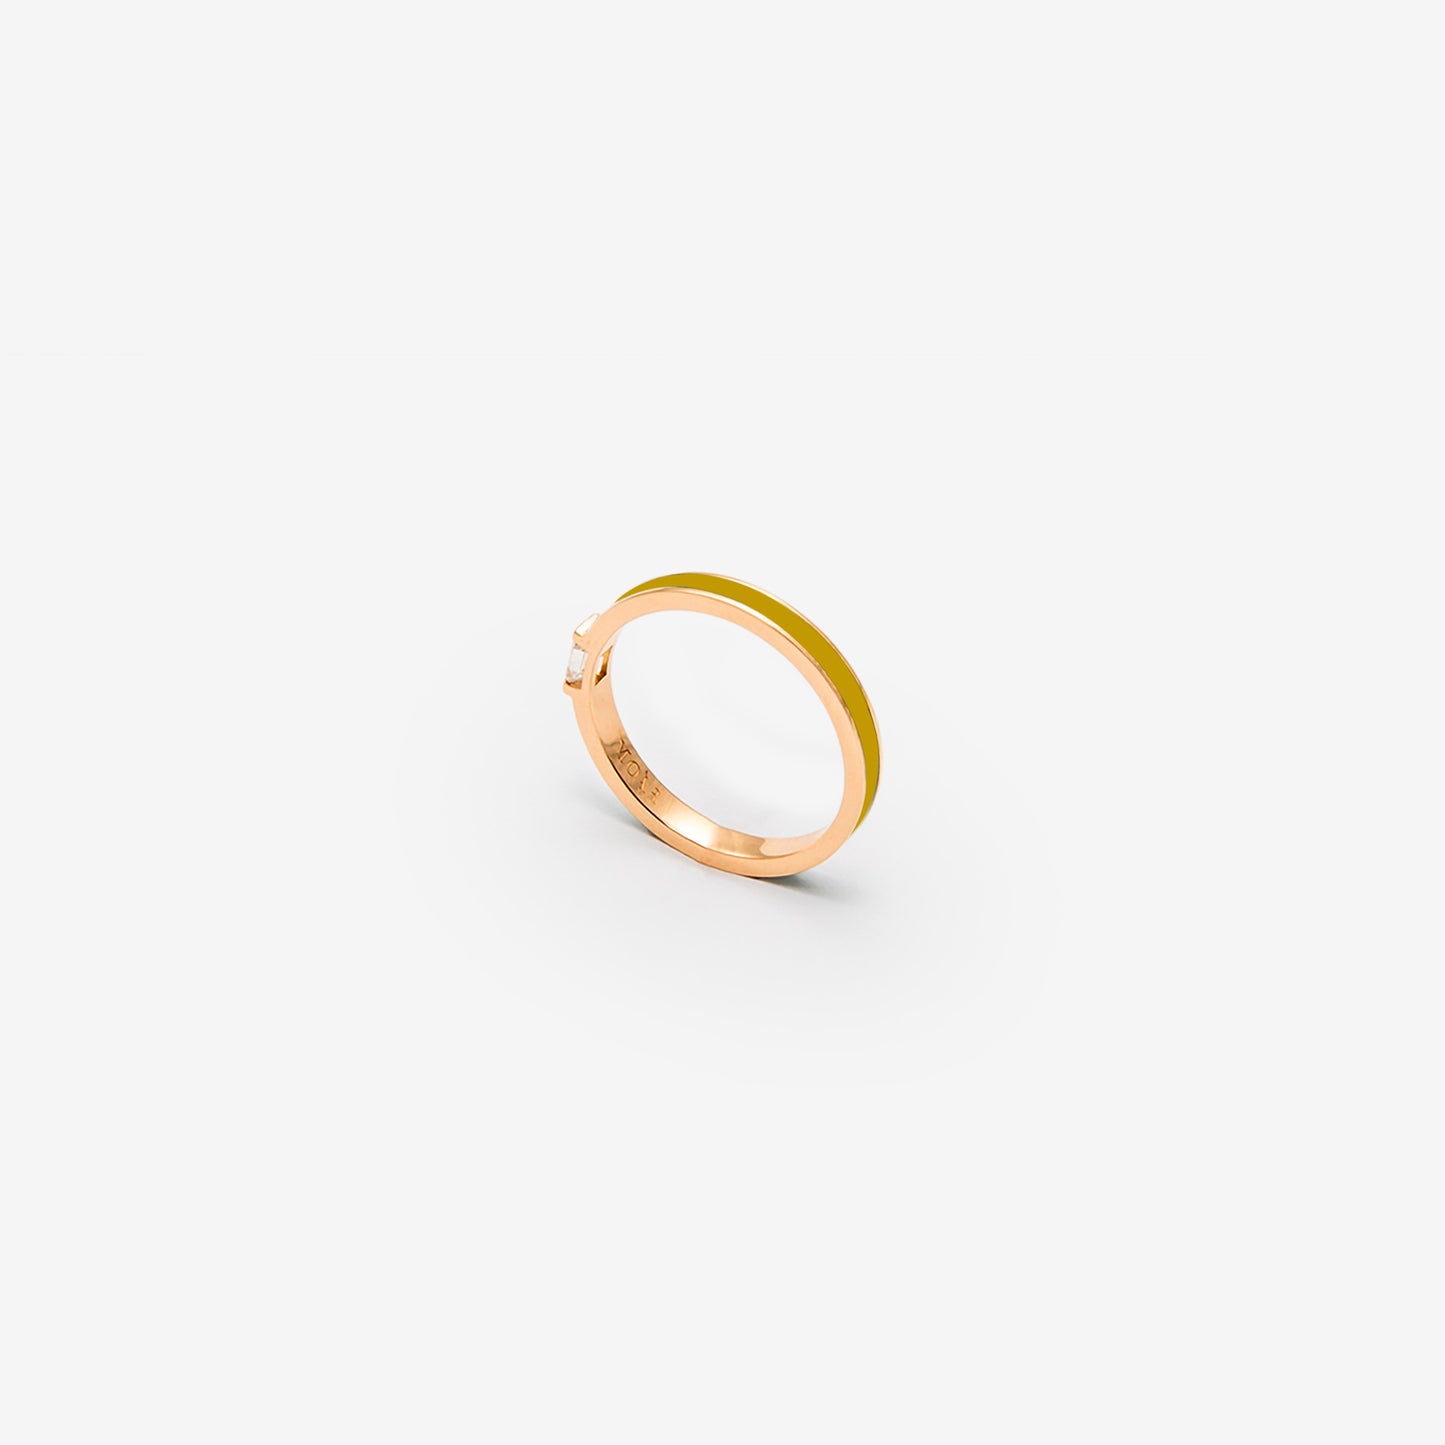 Rose gold band ring with mustard enamel and diamond